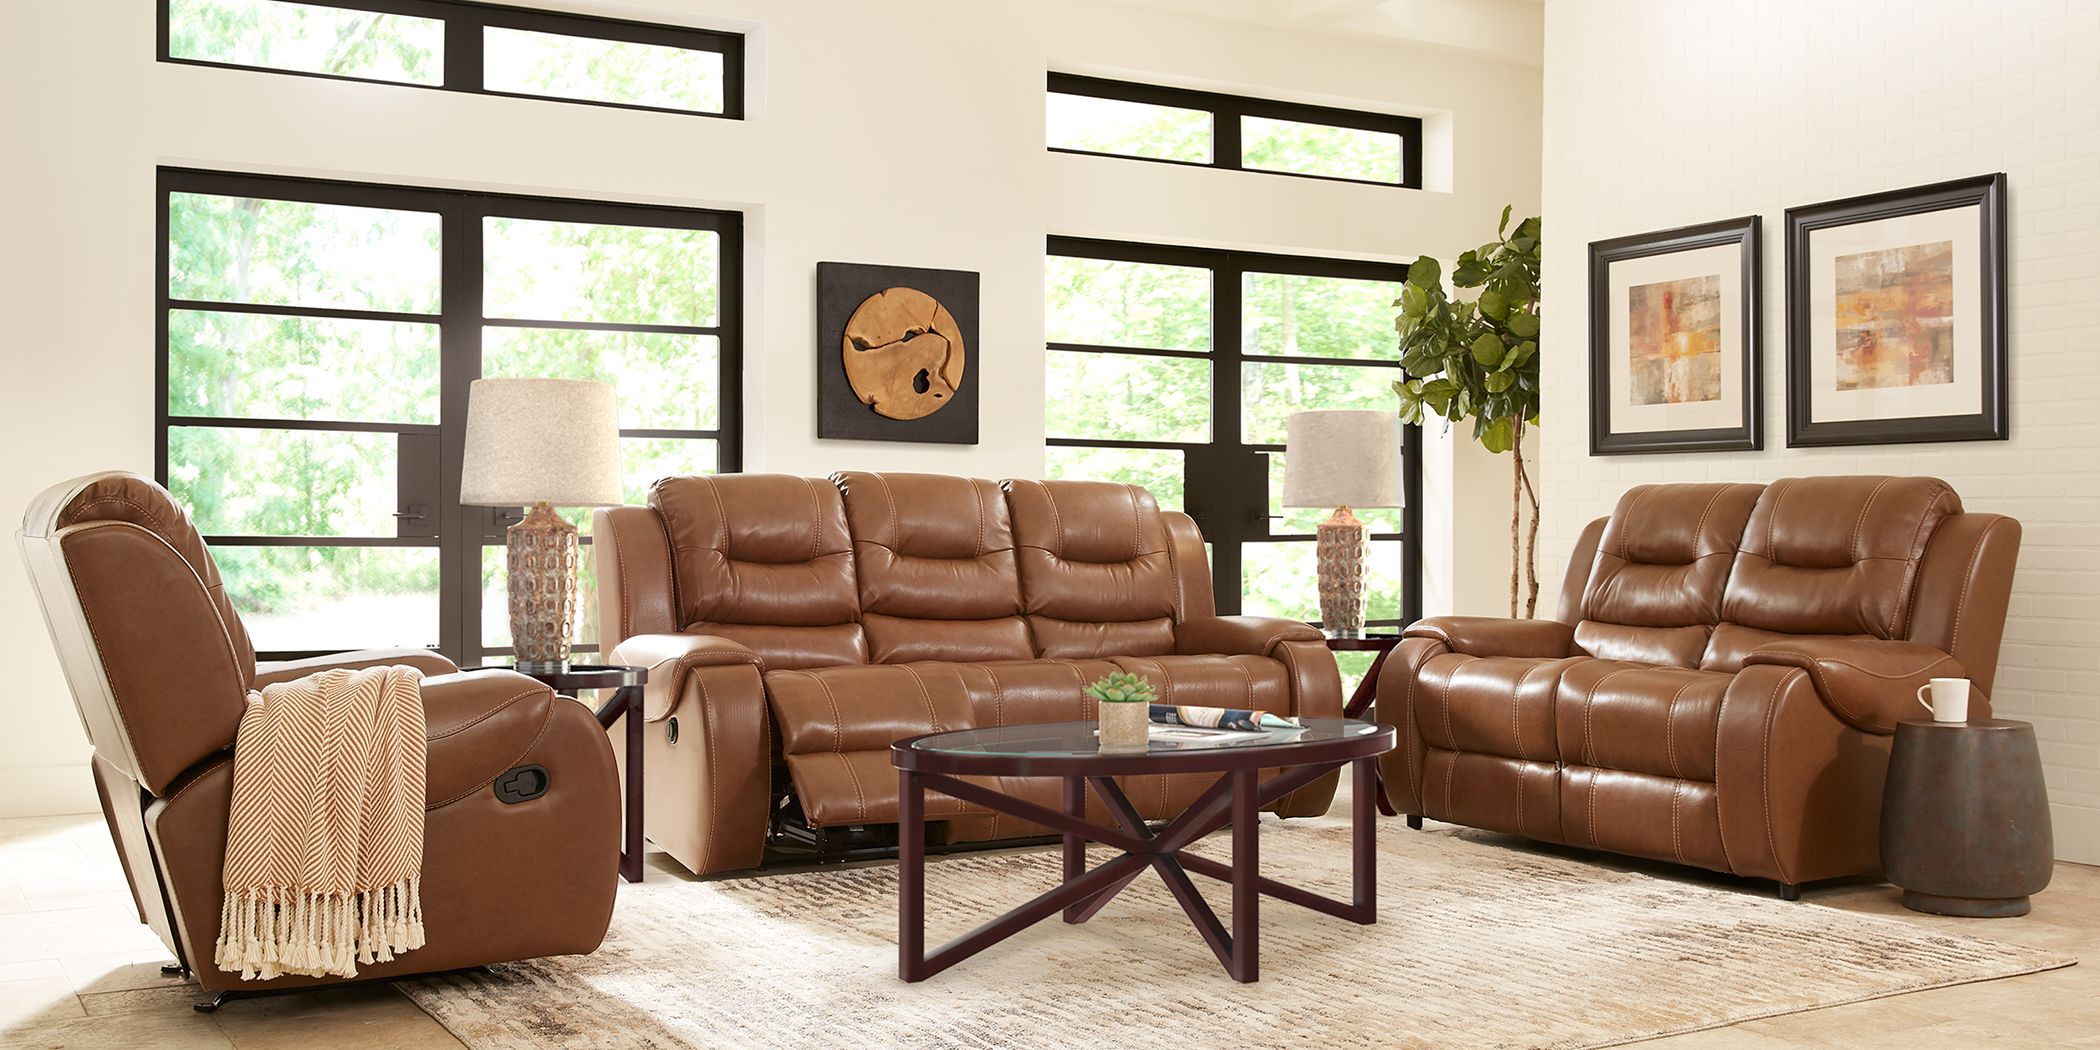 High Plains Saddle Leather 5 Pc Living Room with Reclining Sofa - Rooms